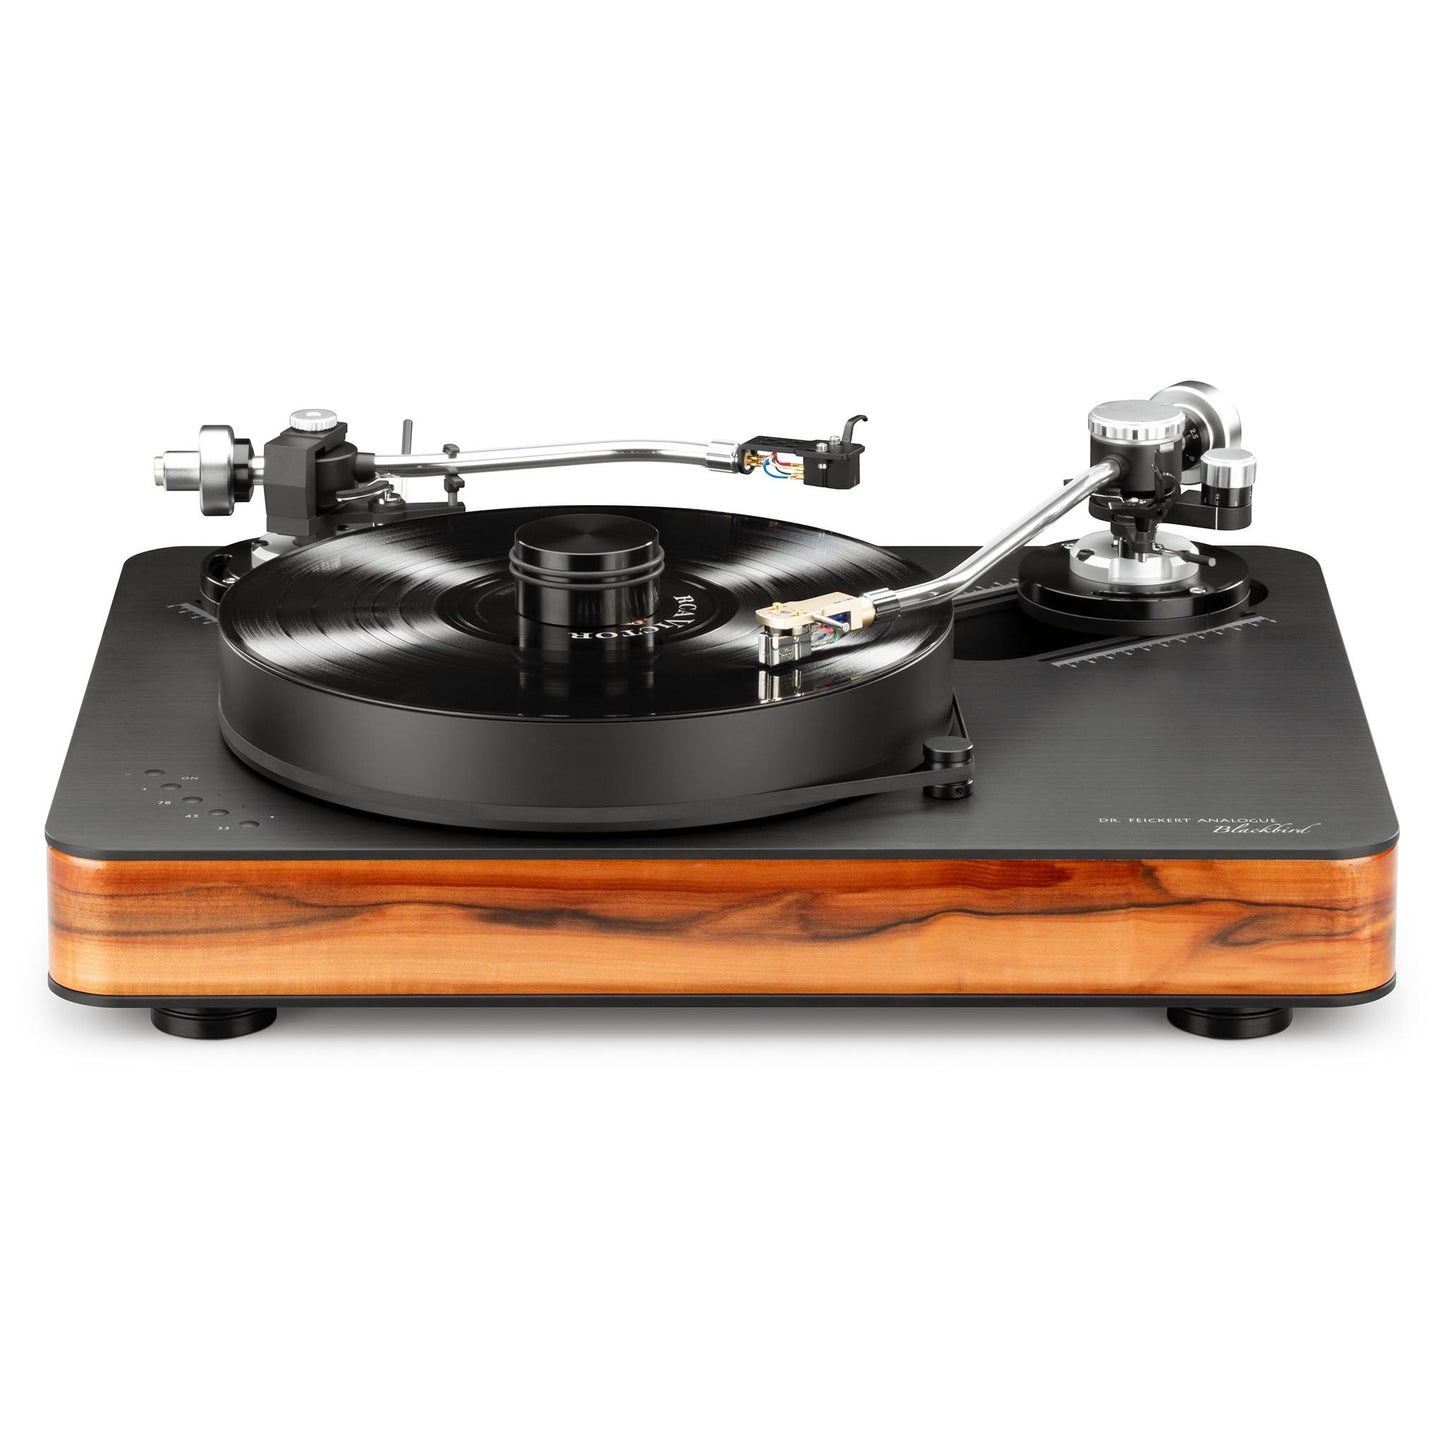 Dr. Feickert Analogue Blackbird Turntable with Deluxe 12 Package